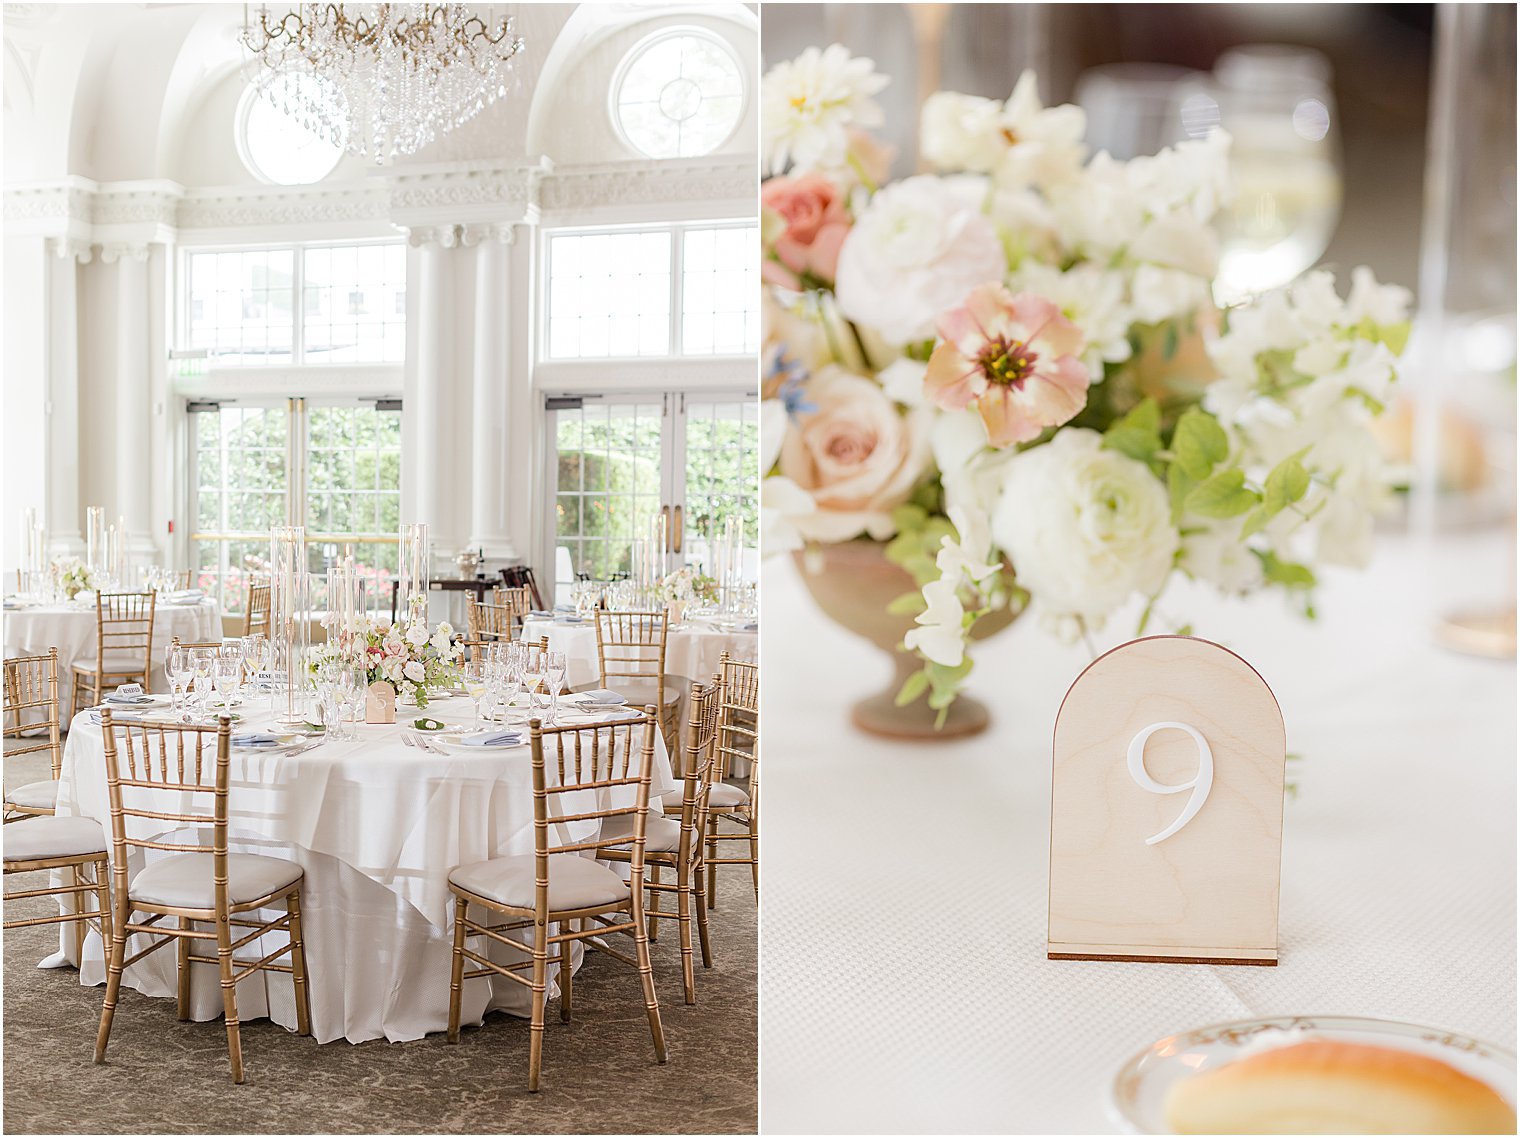 Park Chateau Estate wedding reception with pink and white flowers